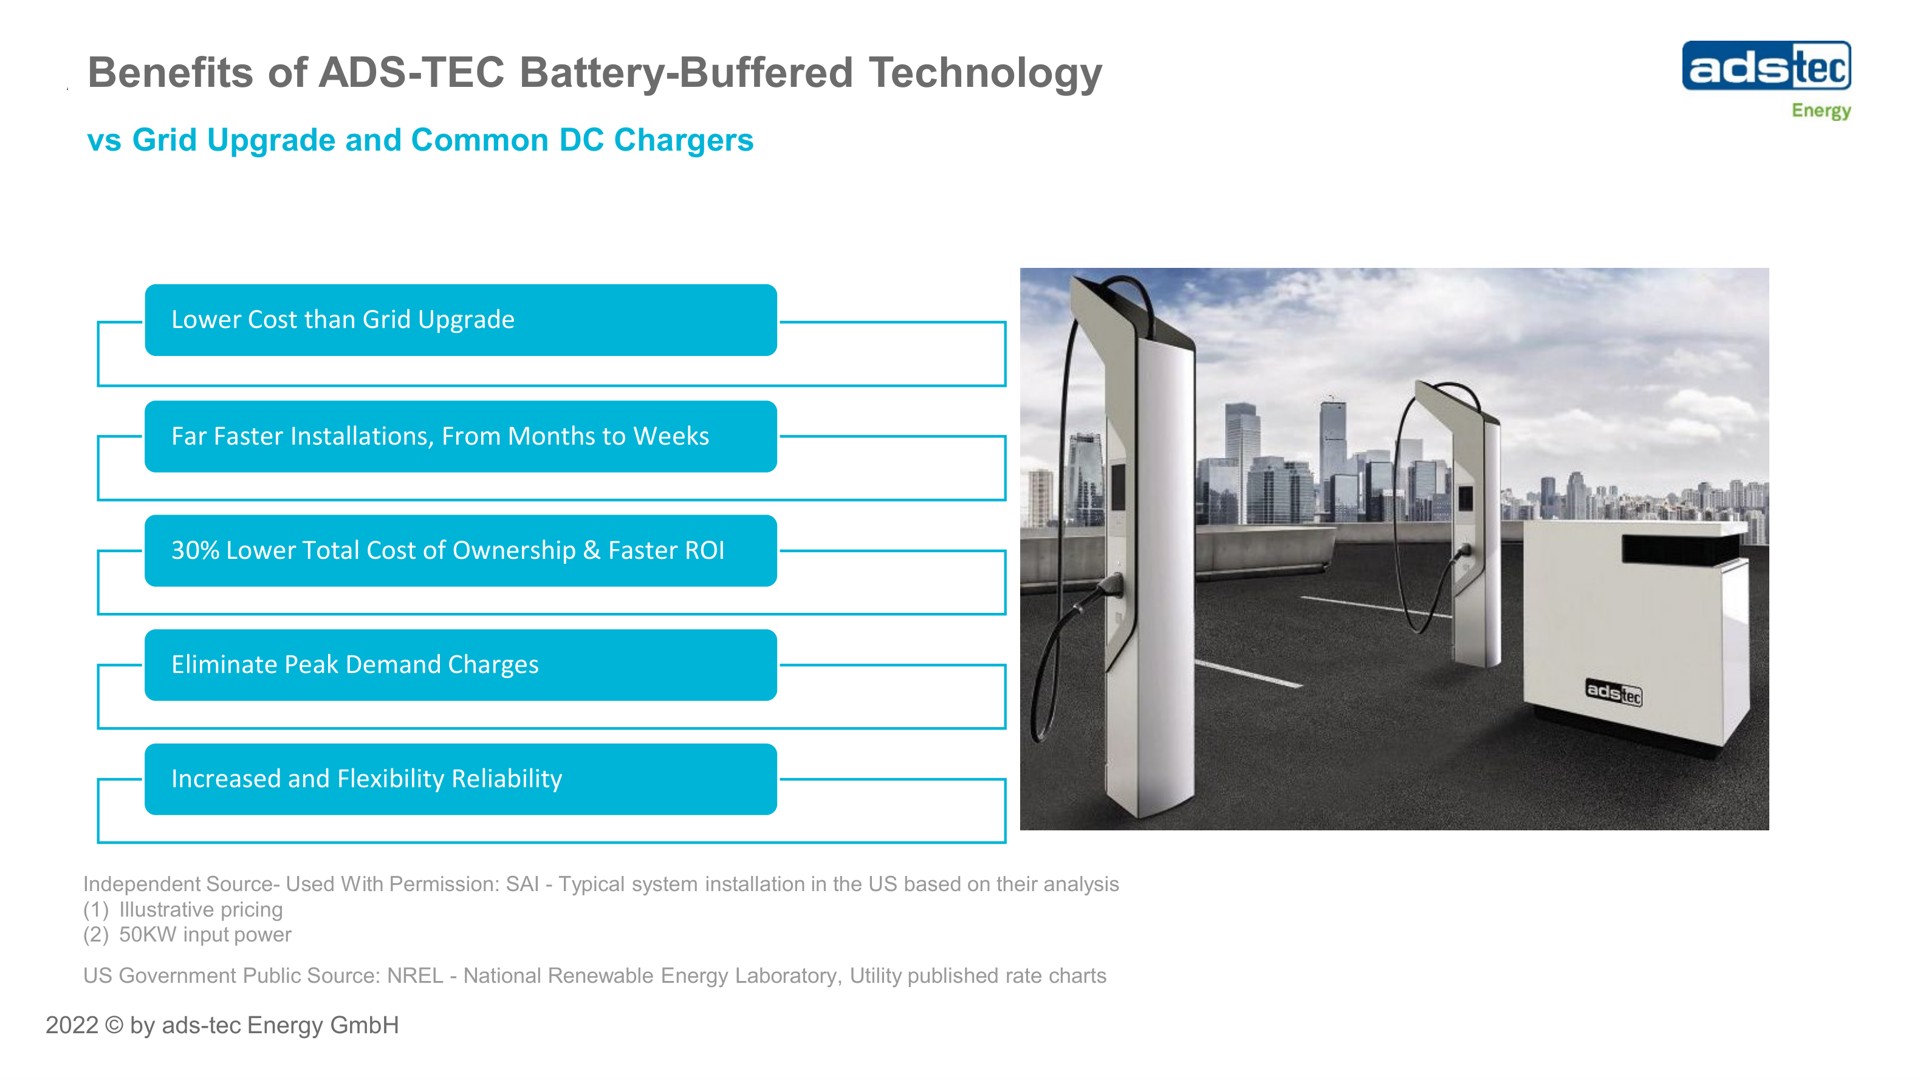 ads tec energy benefits of ads tec battery buffered technology | ads-tec Energy